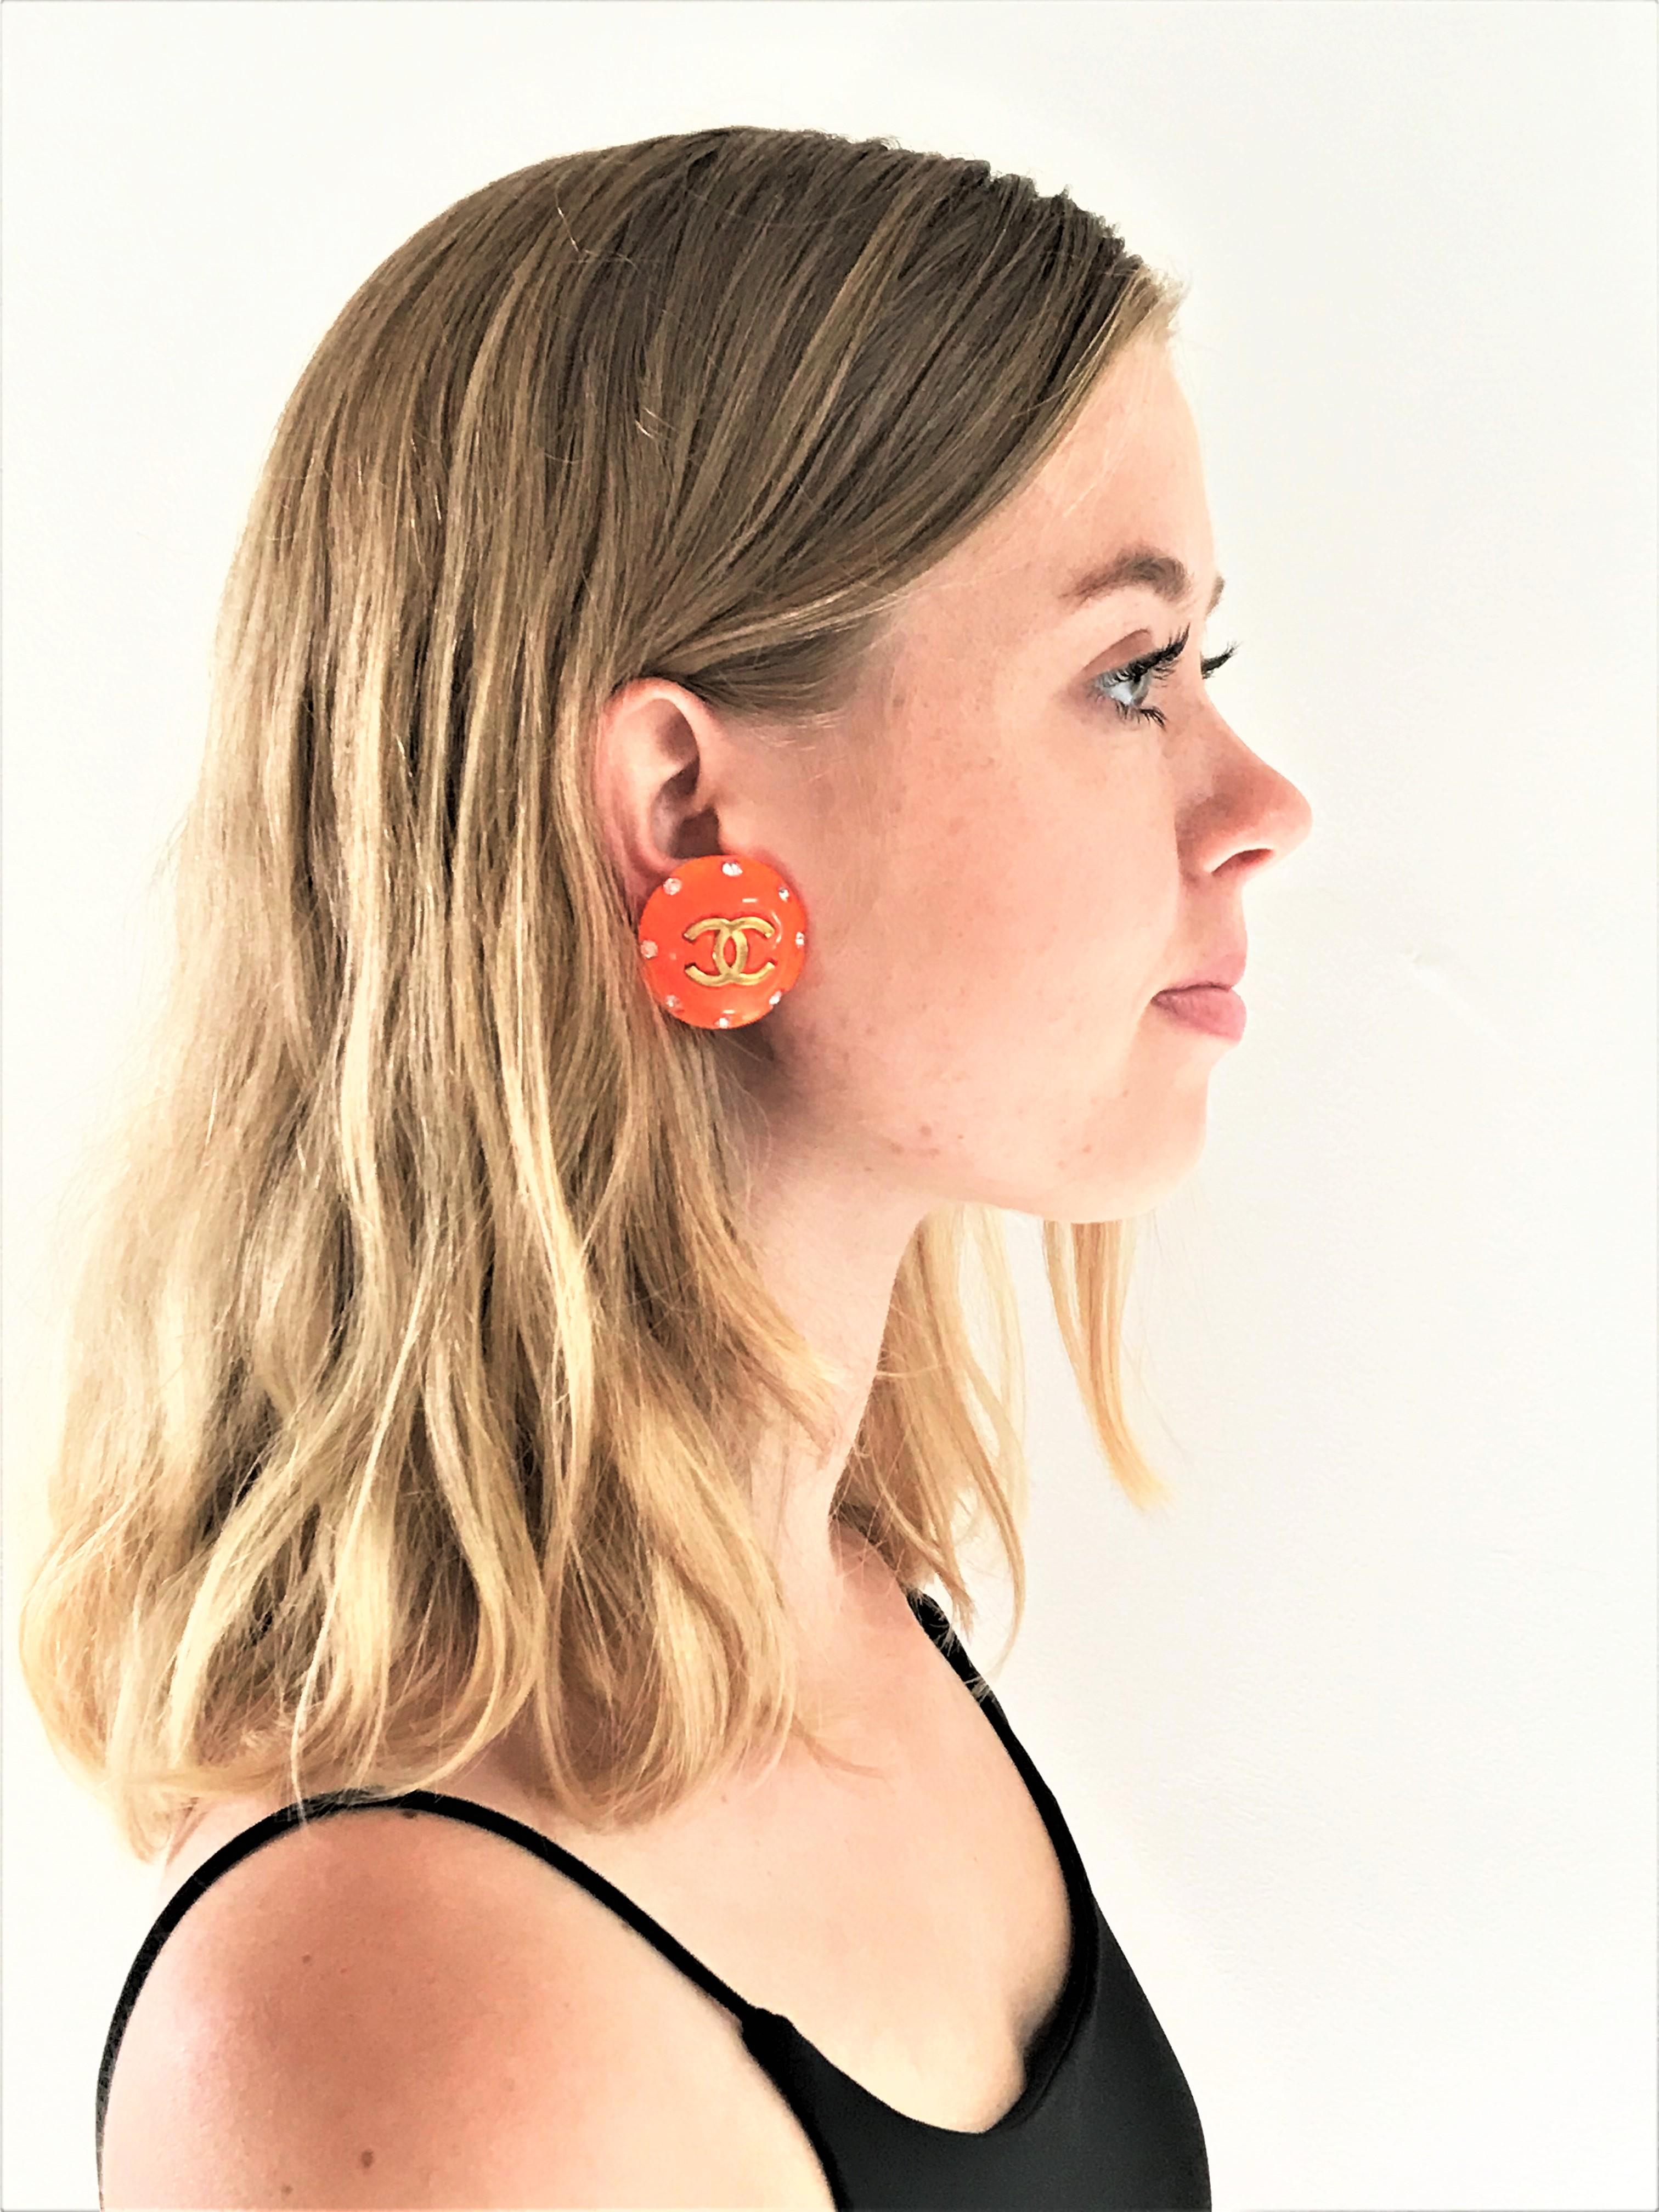 A nice orange summer ear clip by Chanel, signed 95 P made of transparent lucite, comfortable to wear low weight.
Measurement: Diameter 3 cm, Height 1 cm 
